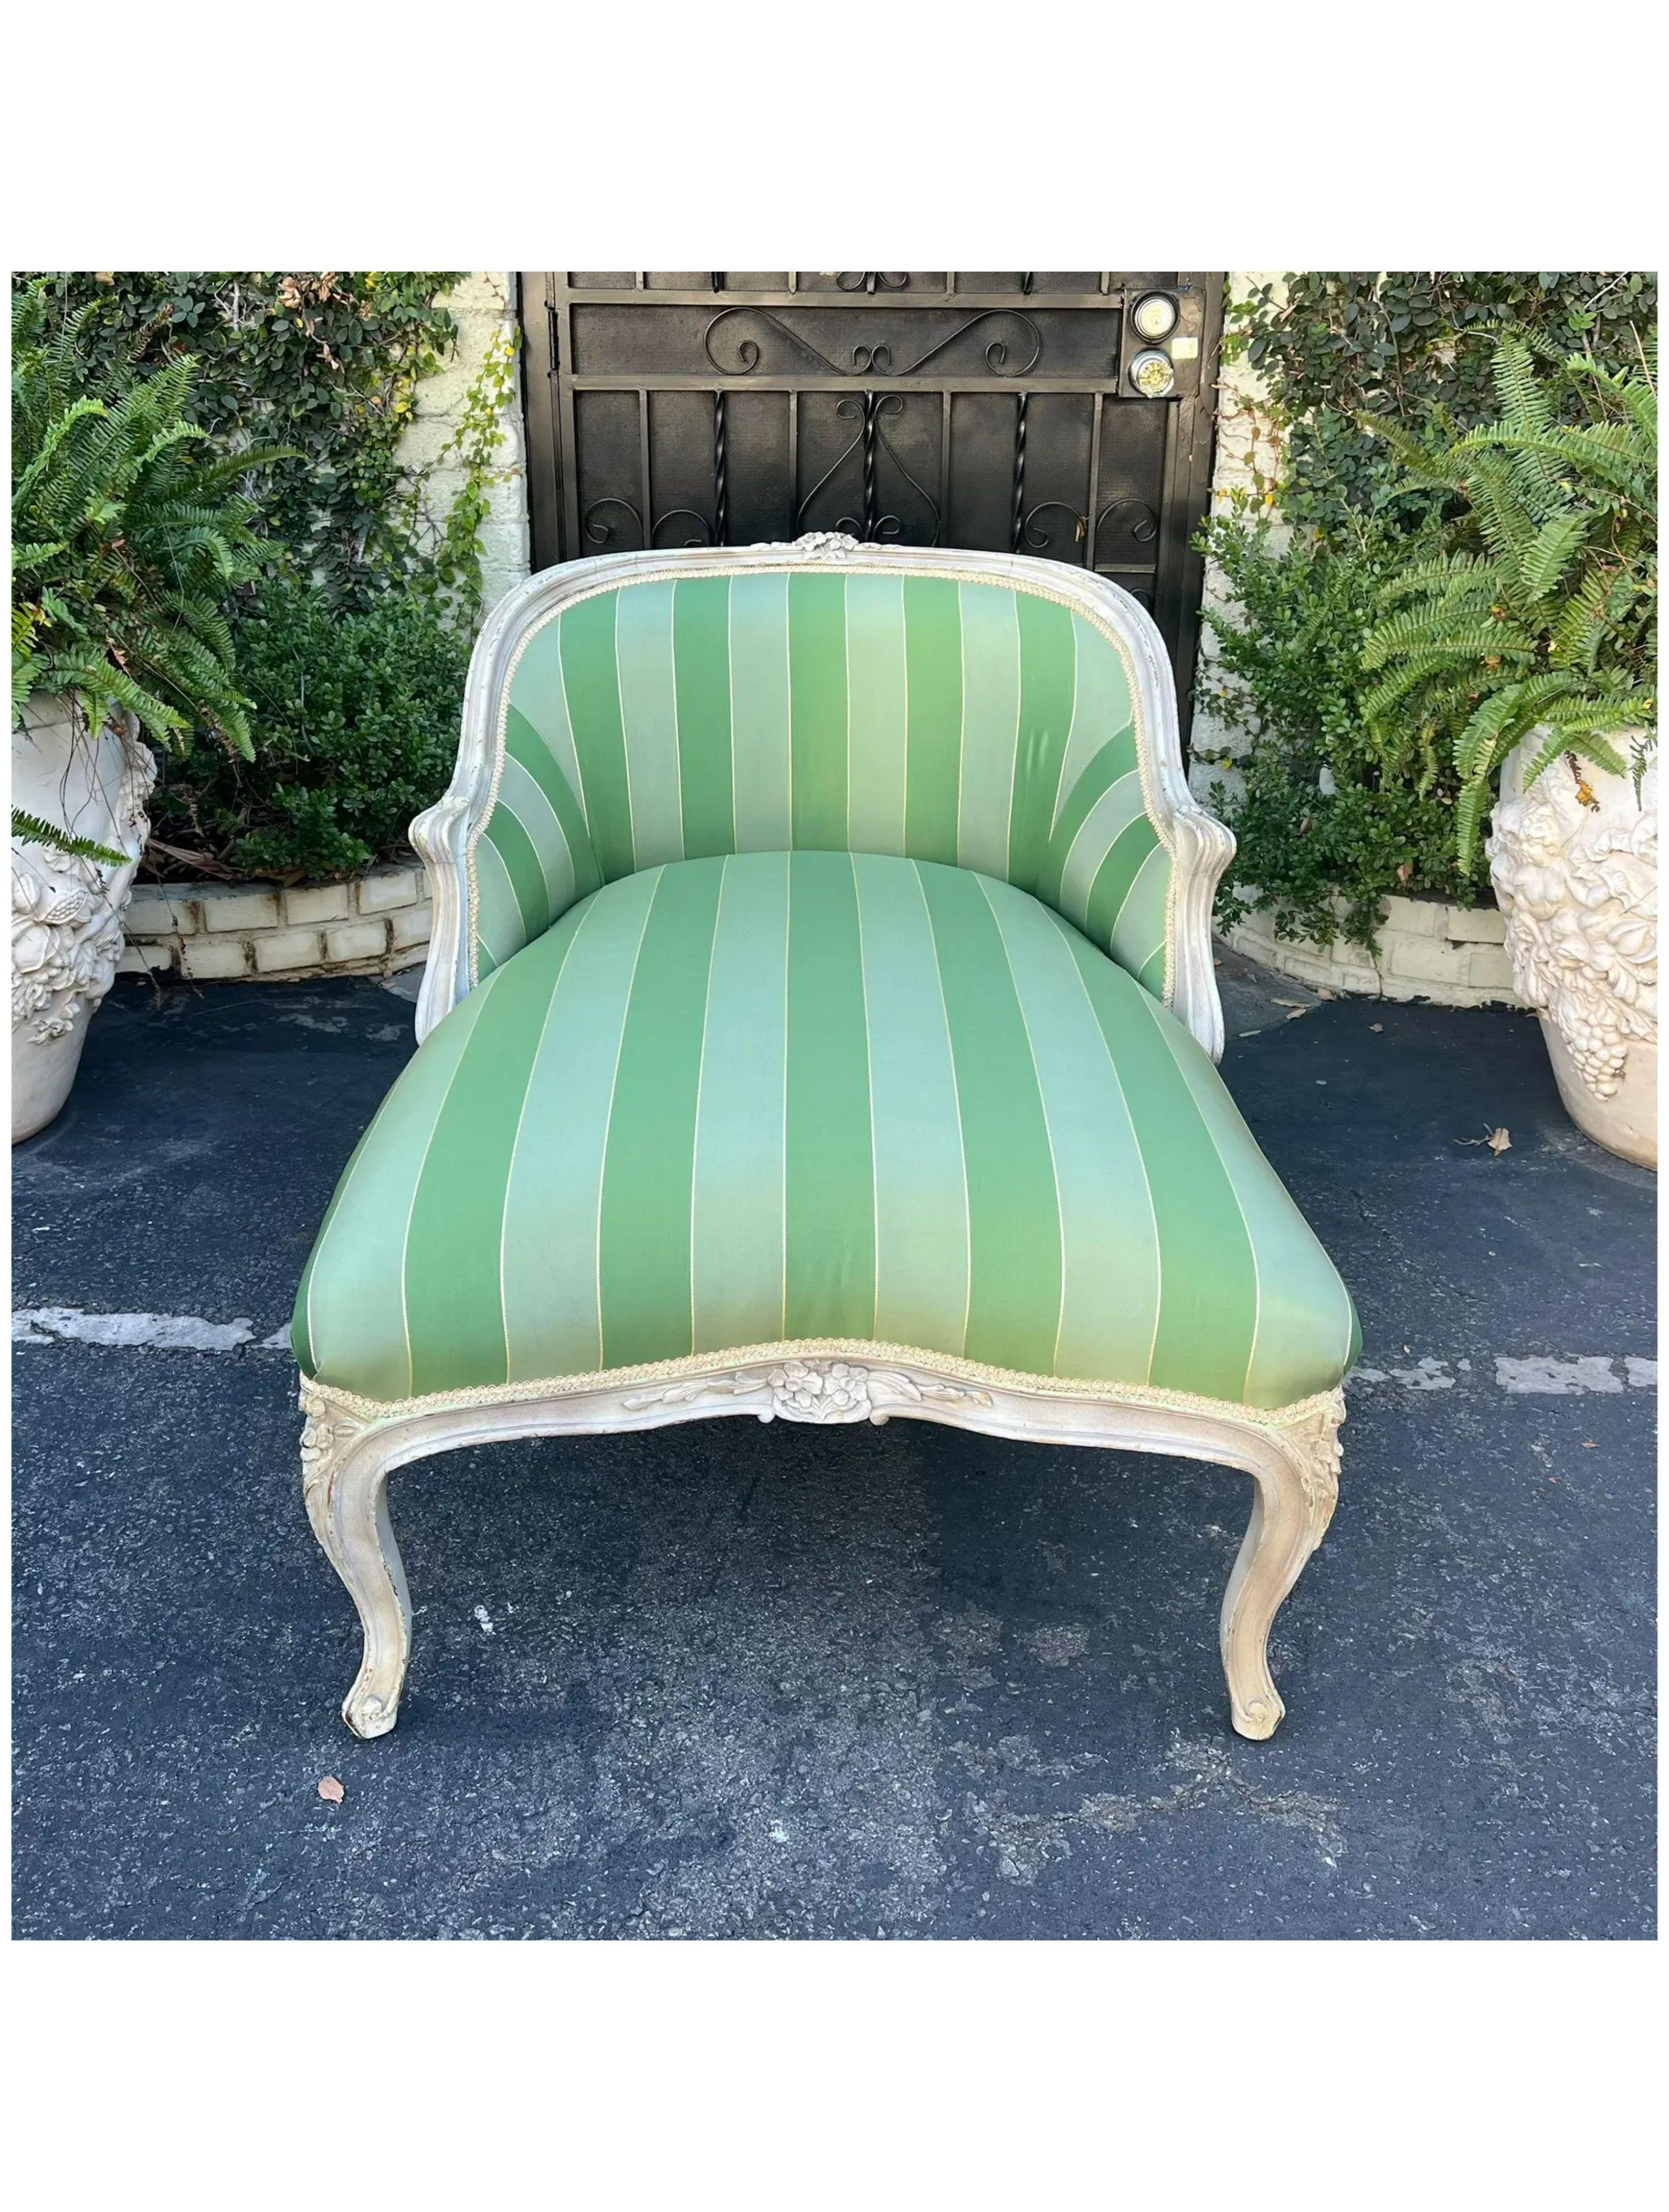 Louis XV Style French Striped Chaise Lounge. It has been freshly upholstered in expensive green striped fabric and it’s super comfortable.

Additional information: 
Materials: Cotton, Silk, Wood
Color: Green
Period: 19th century
Styles: Louis